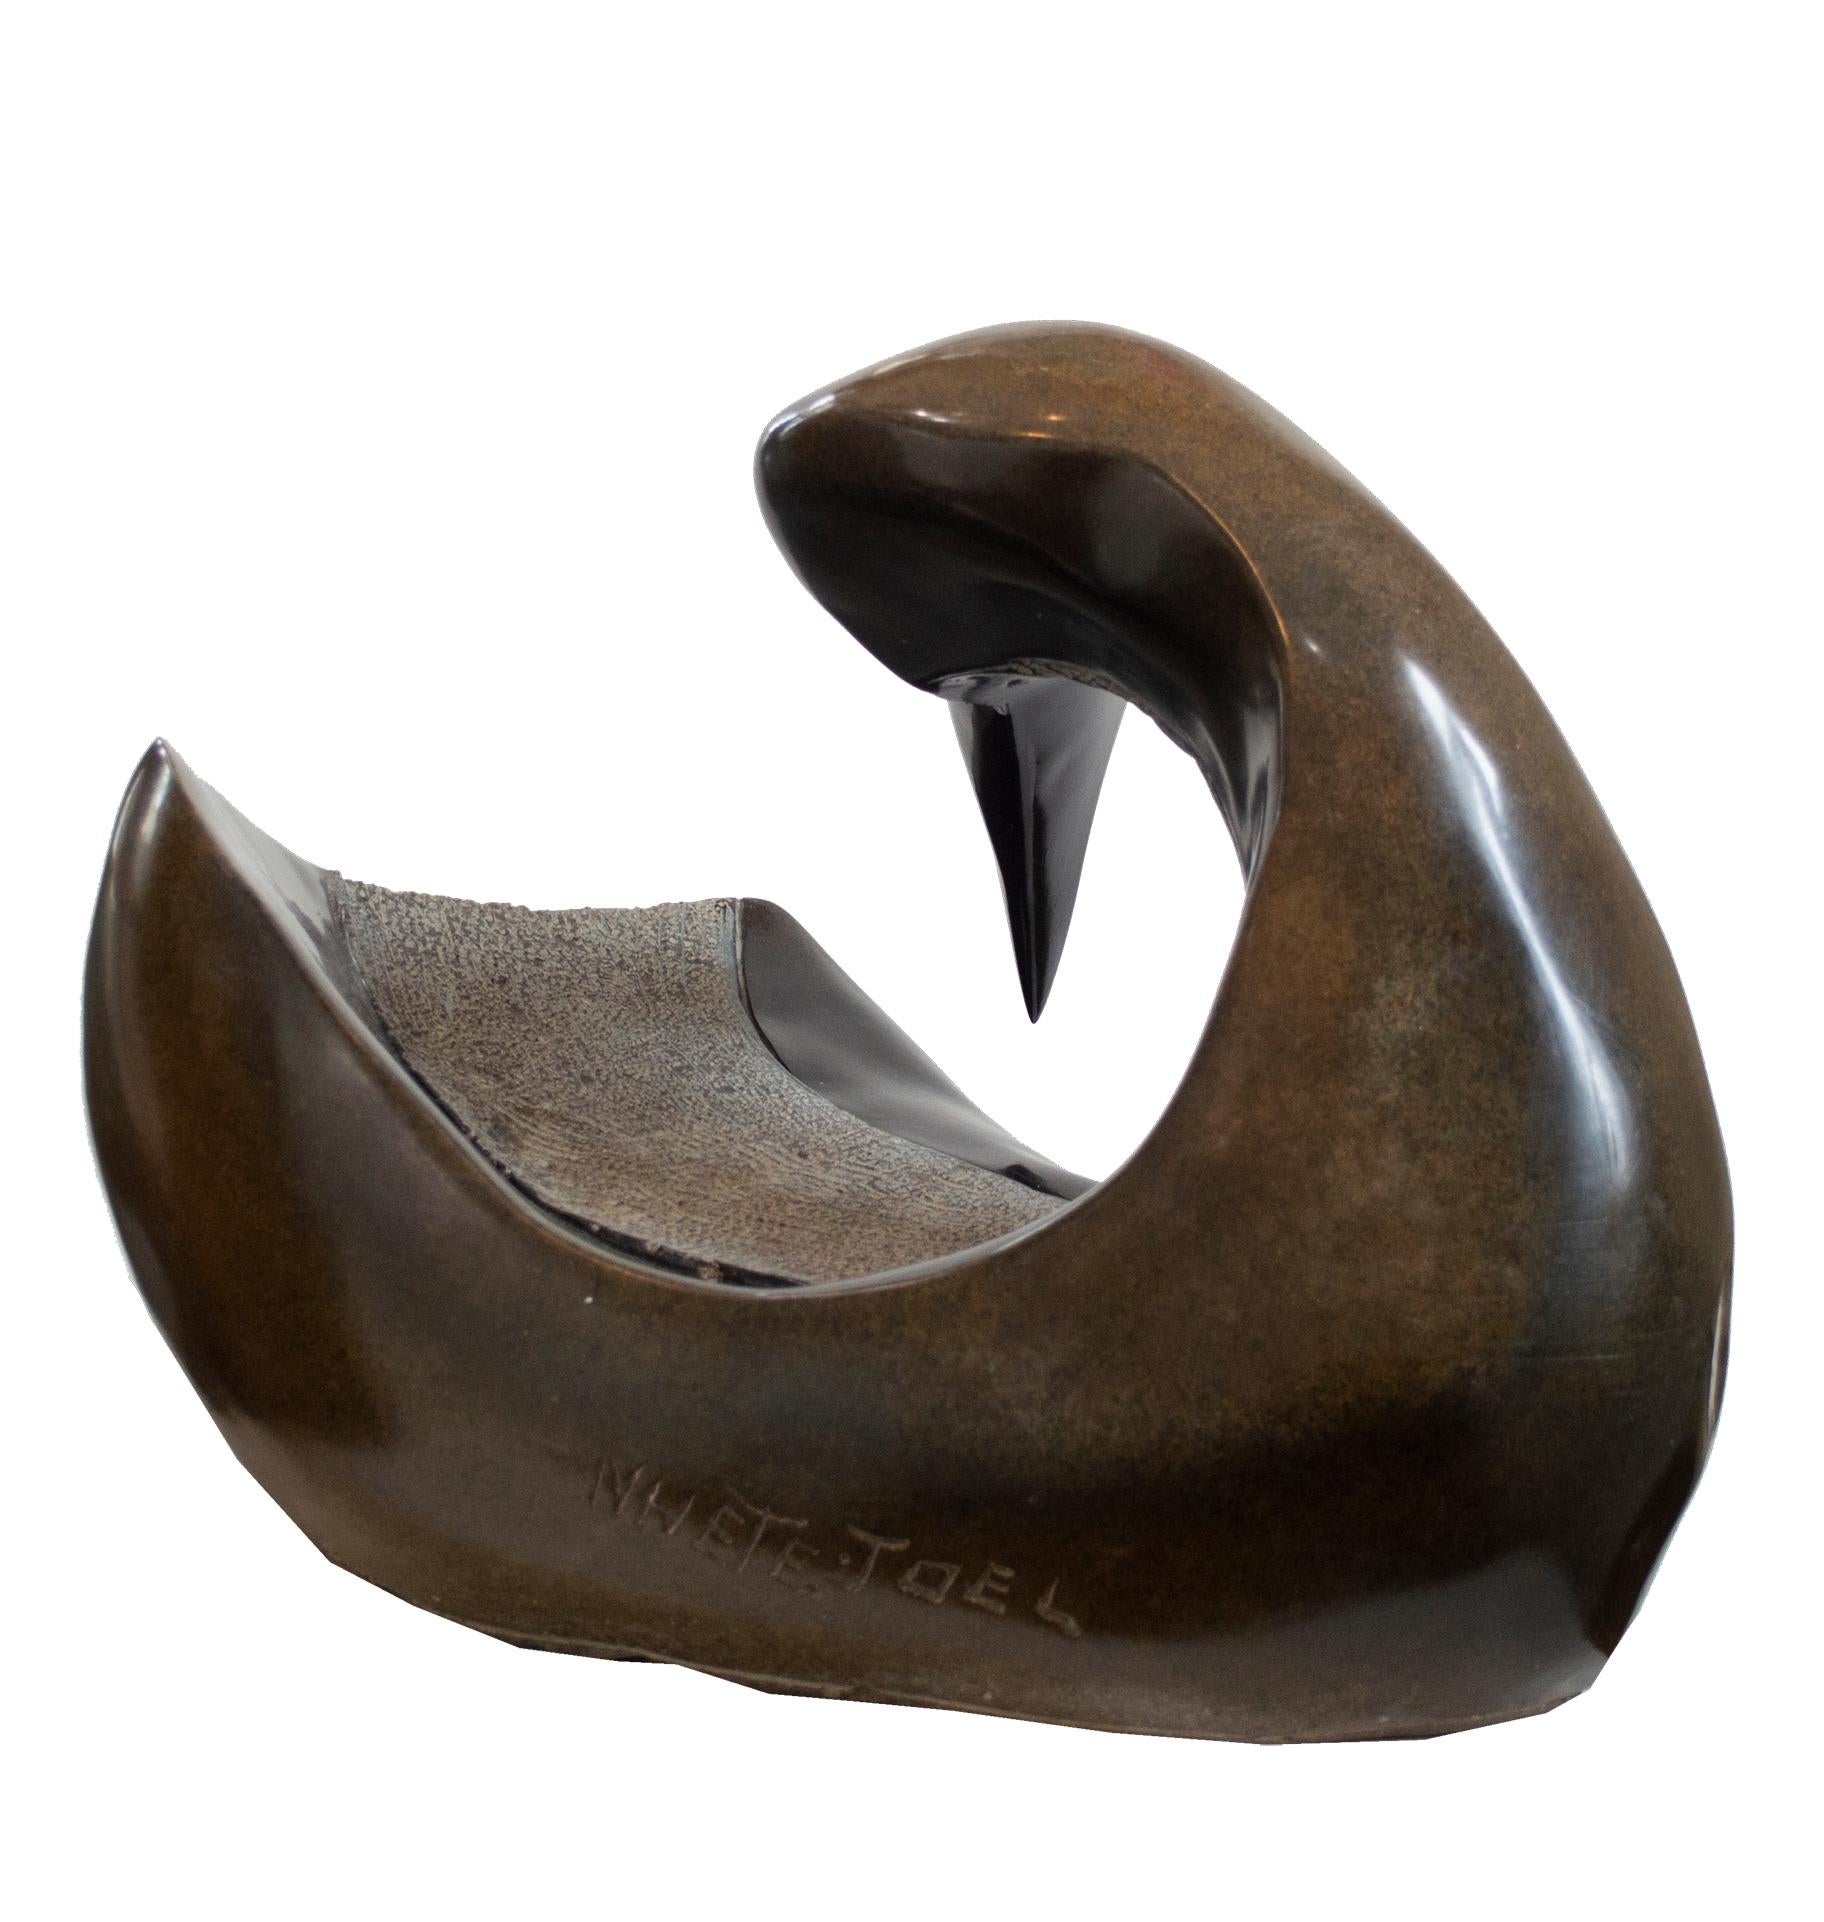 'Landing Dove' is an original opal serpentine stone sculpture signed by the contemporary Zimbabwean artist Joel Nhete. The artist presents in this sculpture a highly abstracted figure of a bird, leaning its head backward with its wings down as